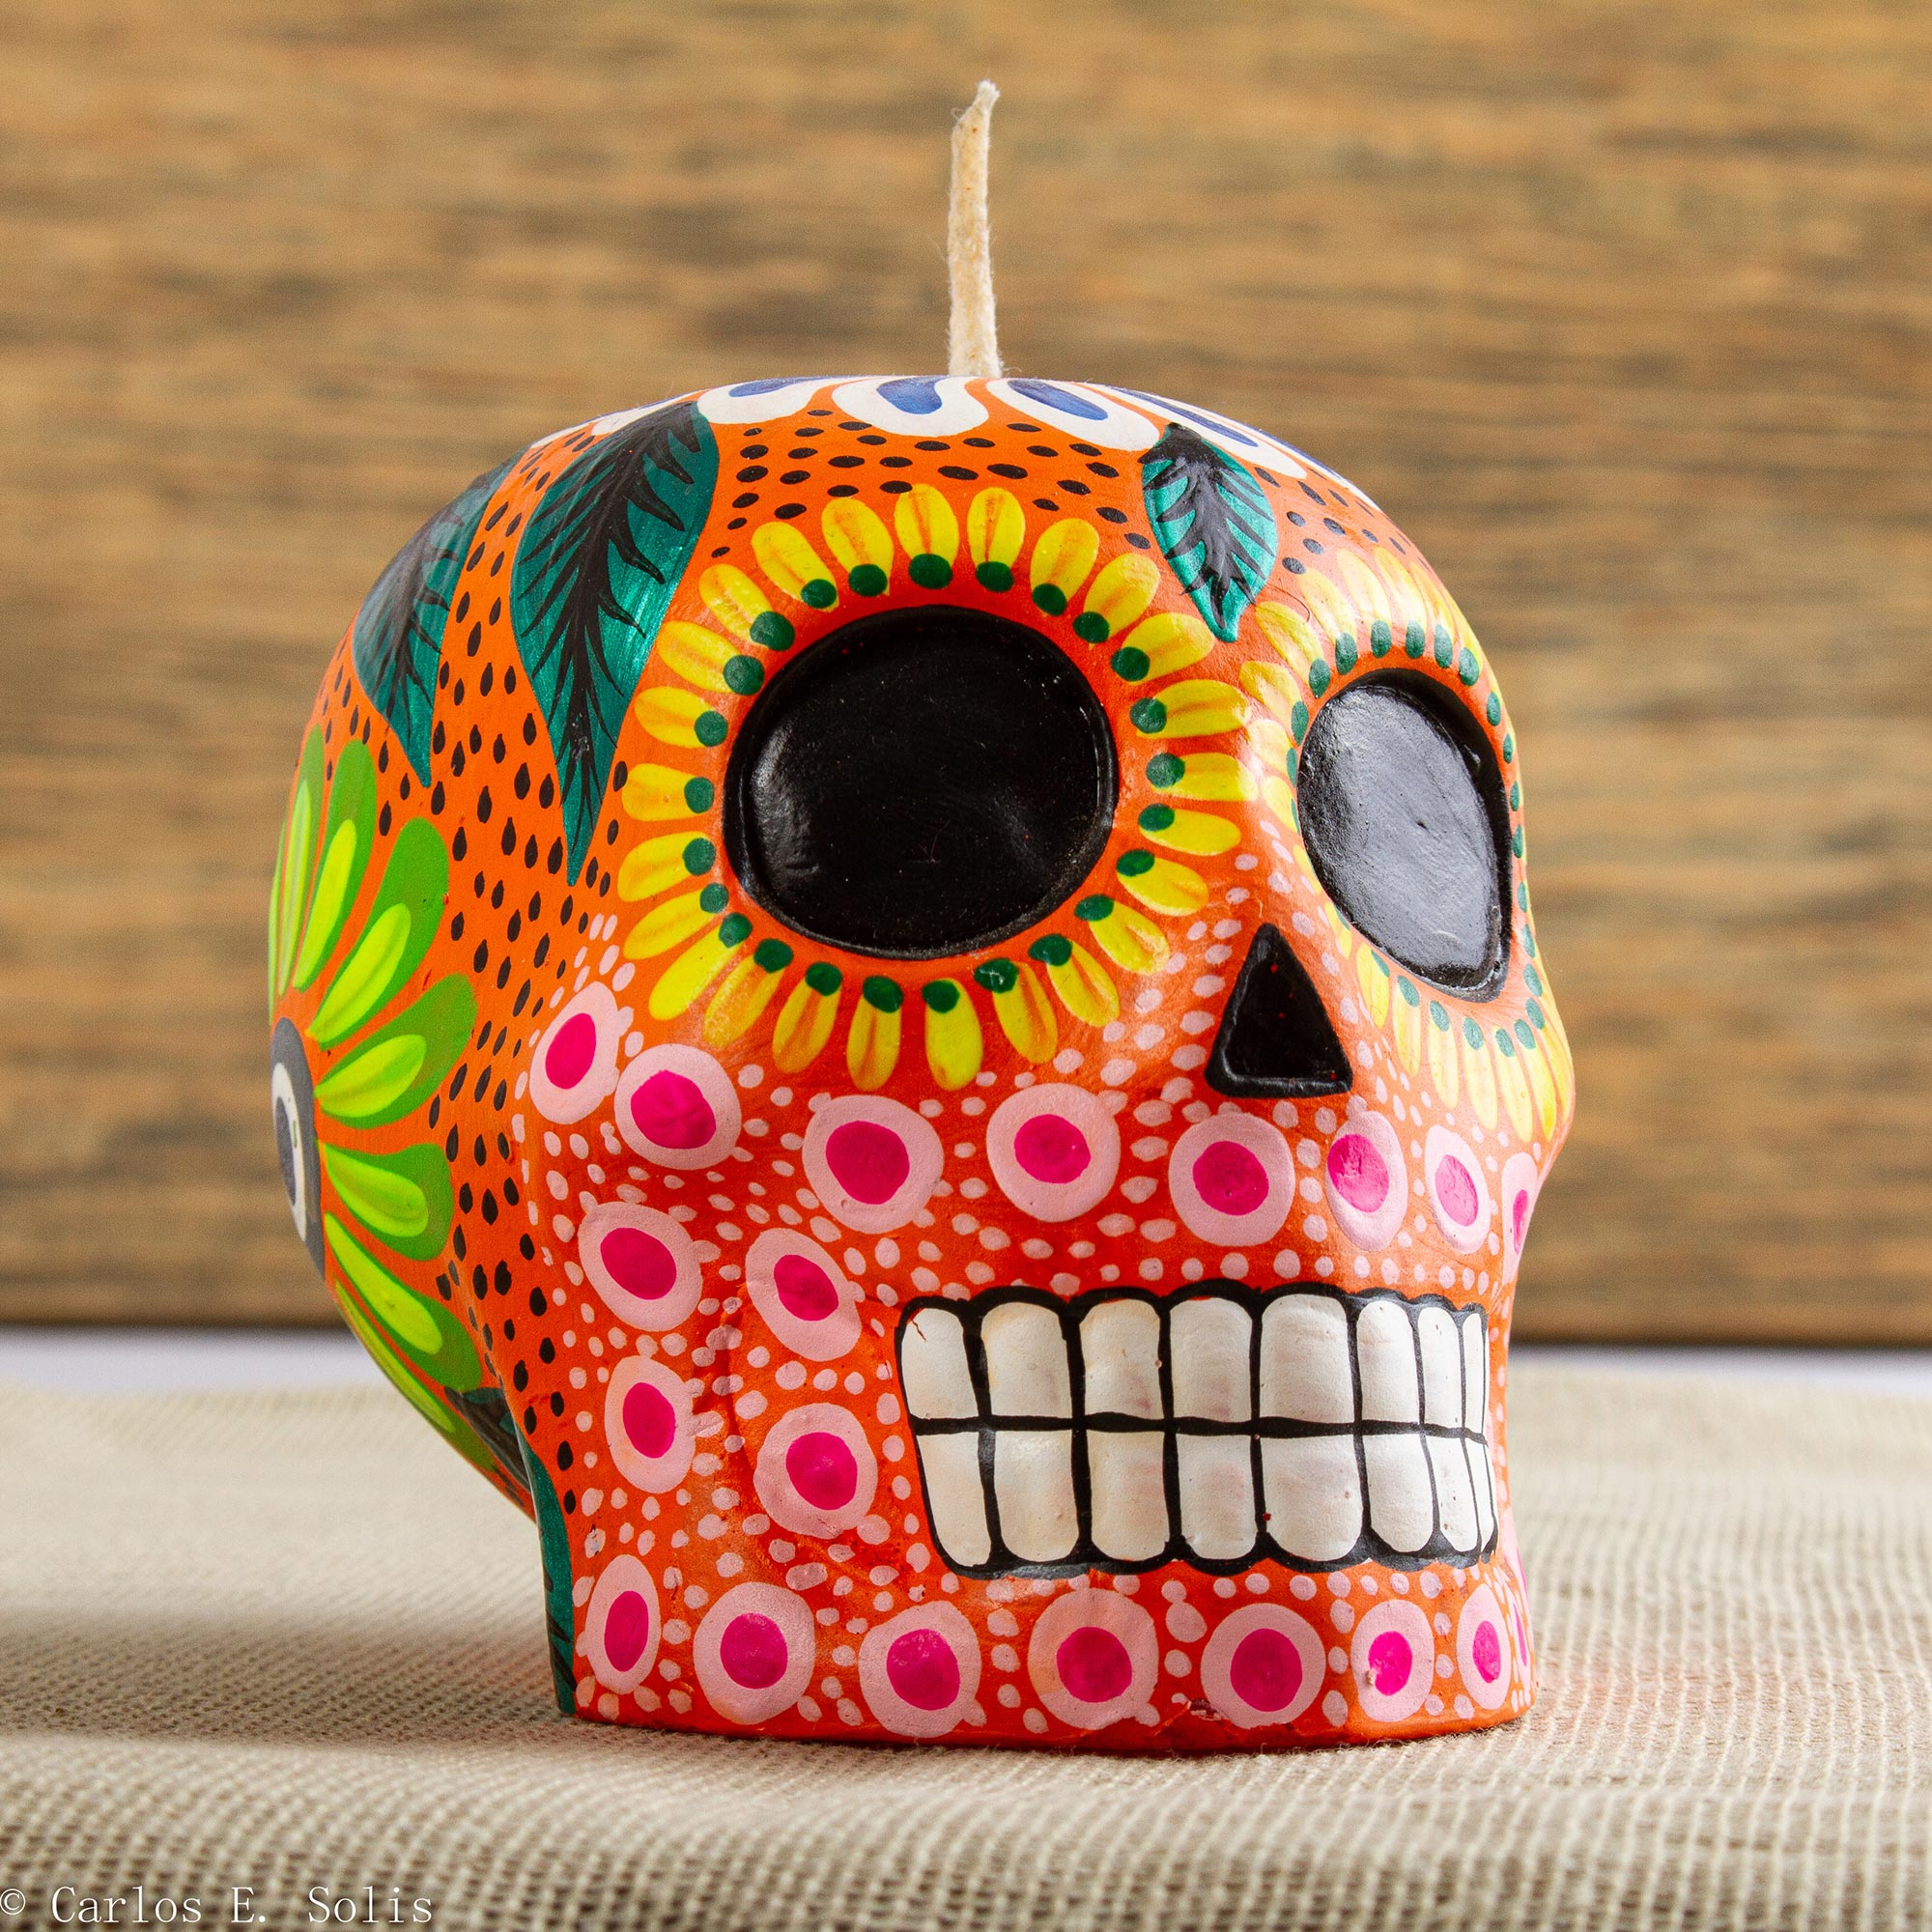 1 Candle included Image shows front and back of candle. Mexican Skull Calavera Christmas Candle Mexican Skull Calavera Candle Pillar Candle 2 Sizes available Handmade and Handprinted